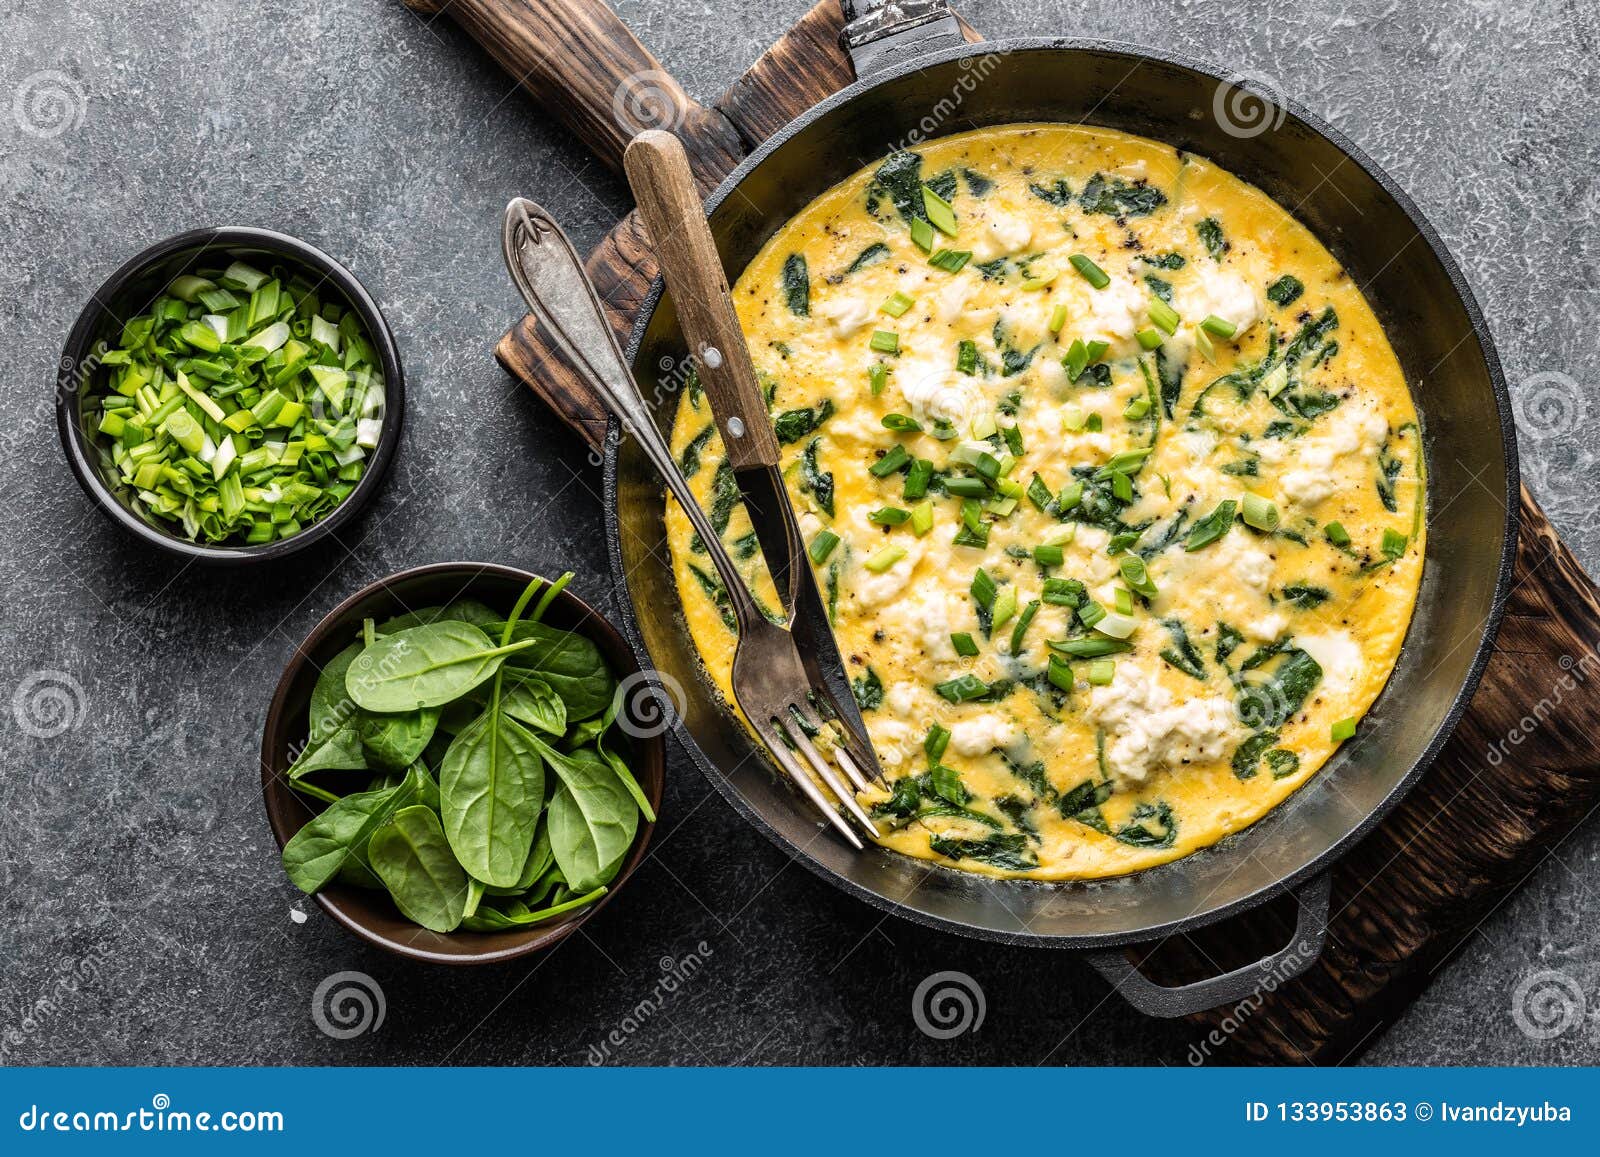 omelette with spinach and cheese in a pan top view